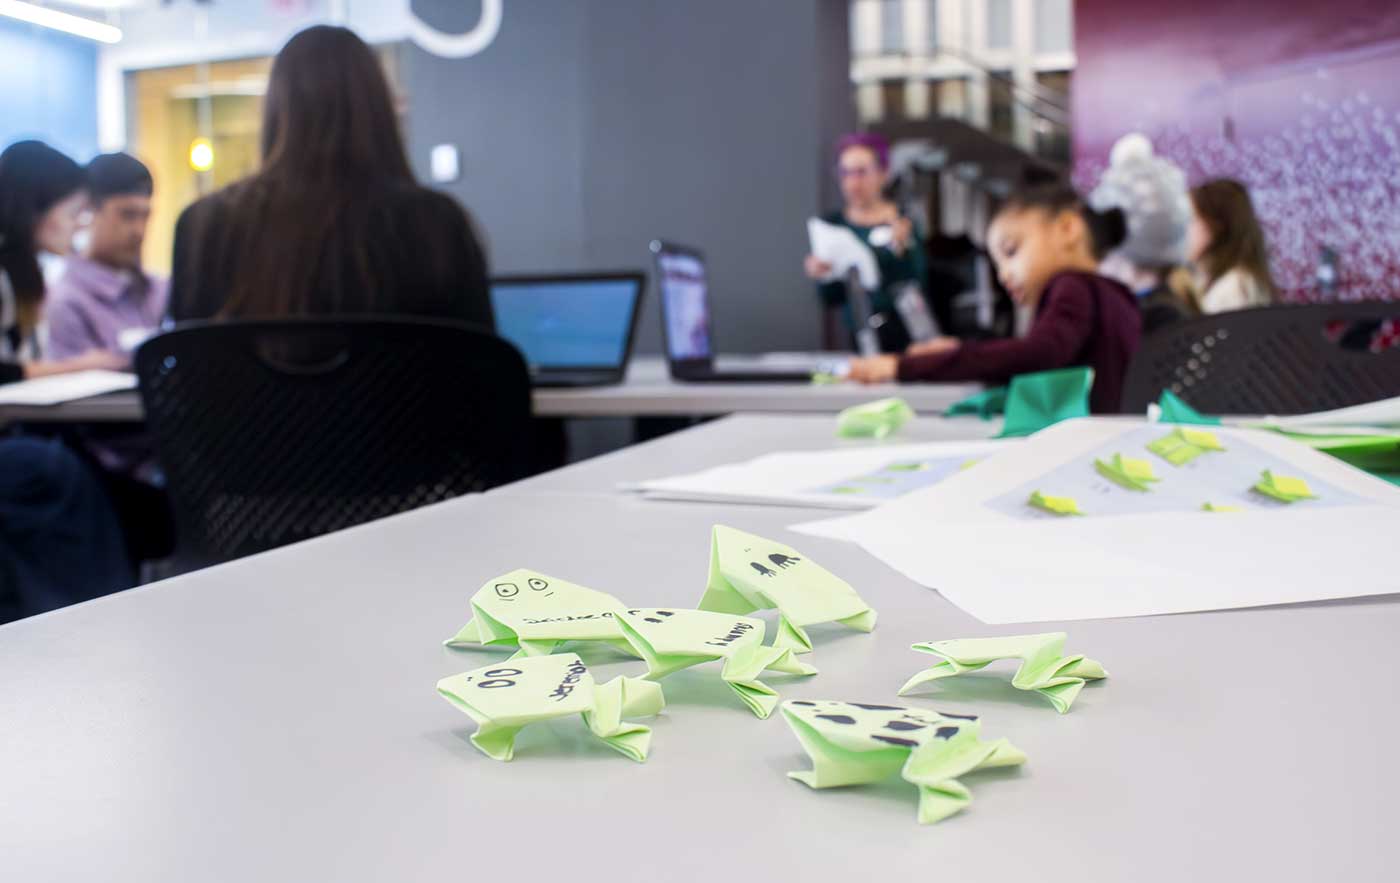 Six origami frogs made of bright green paper are scattered on a table while, in the background, Laney Strange speaks to the group of girls